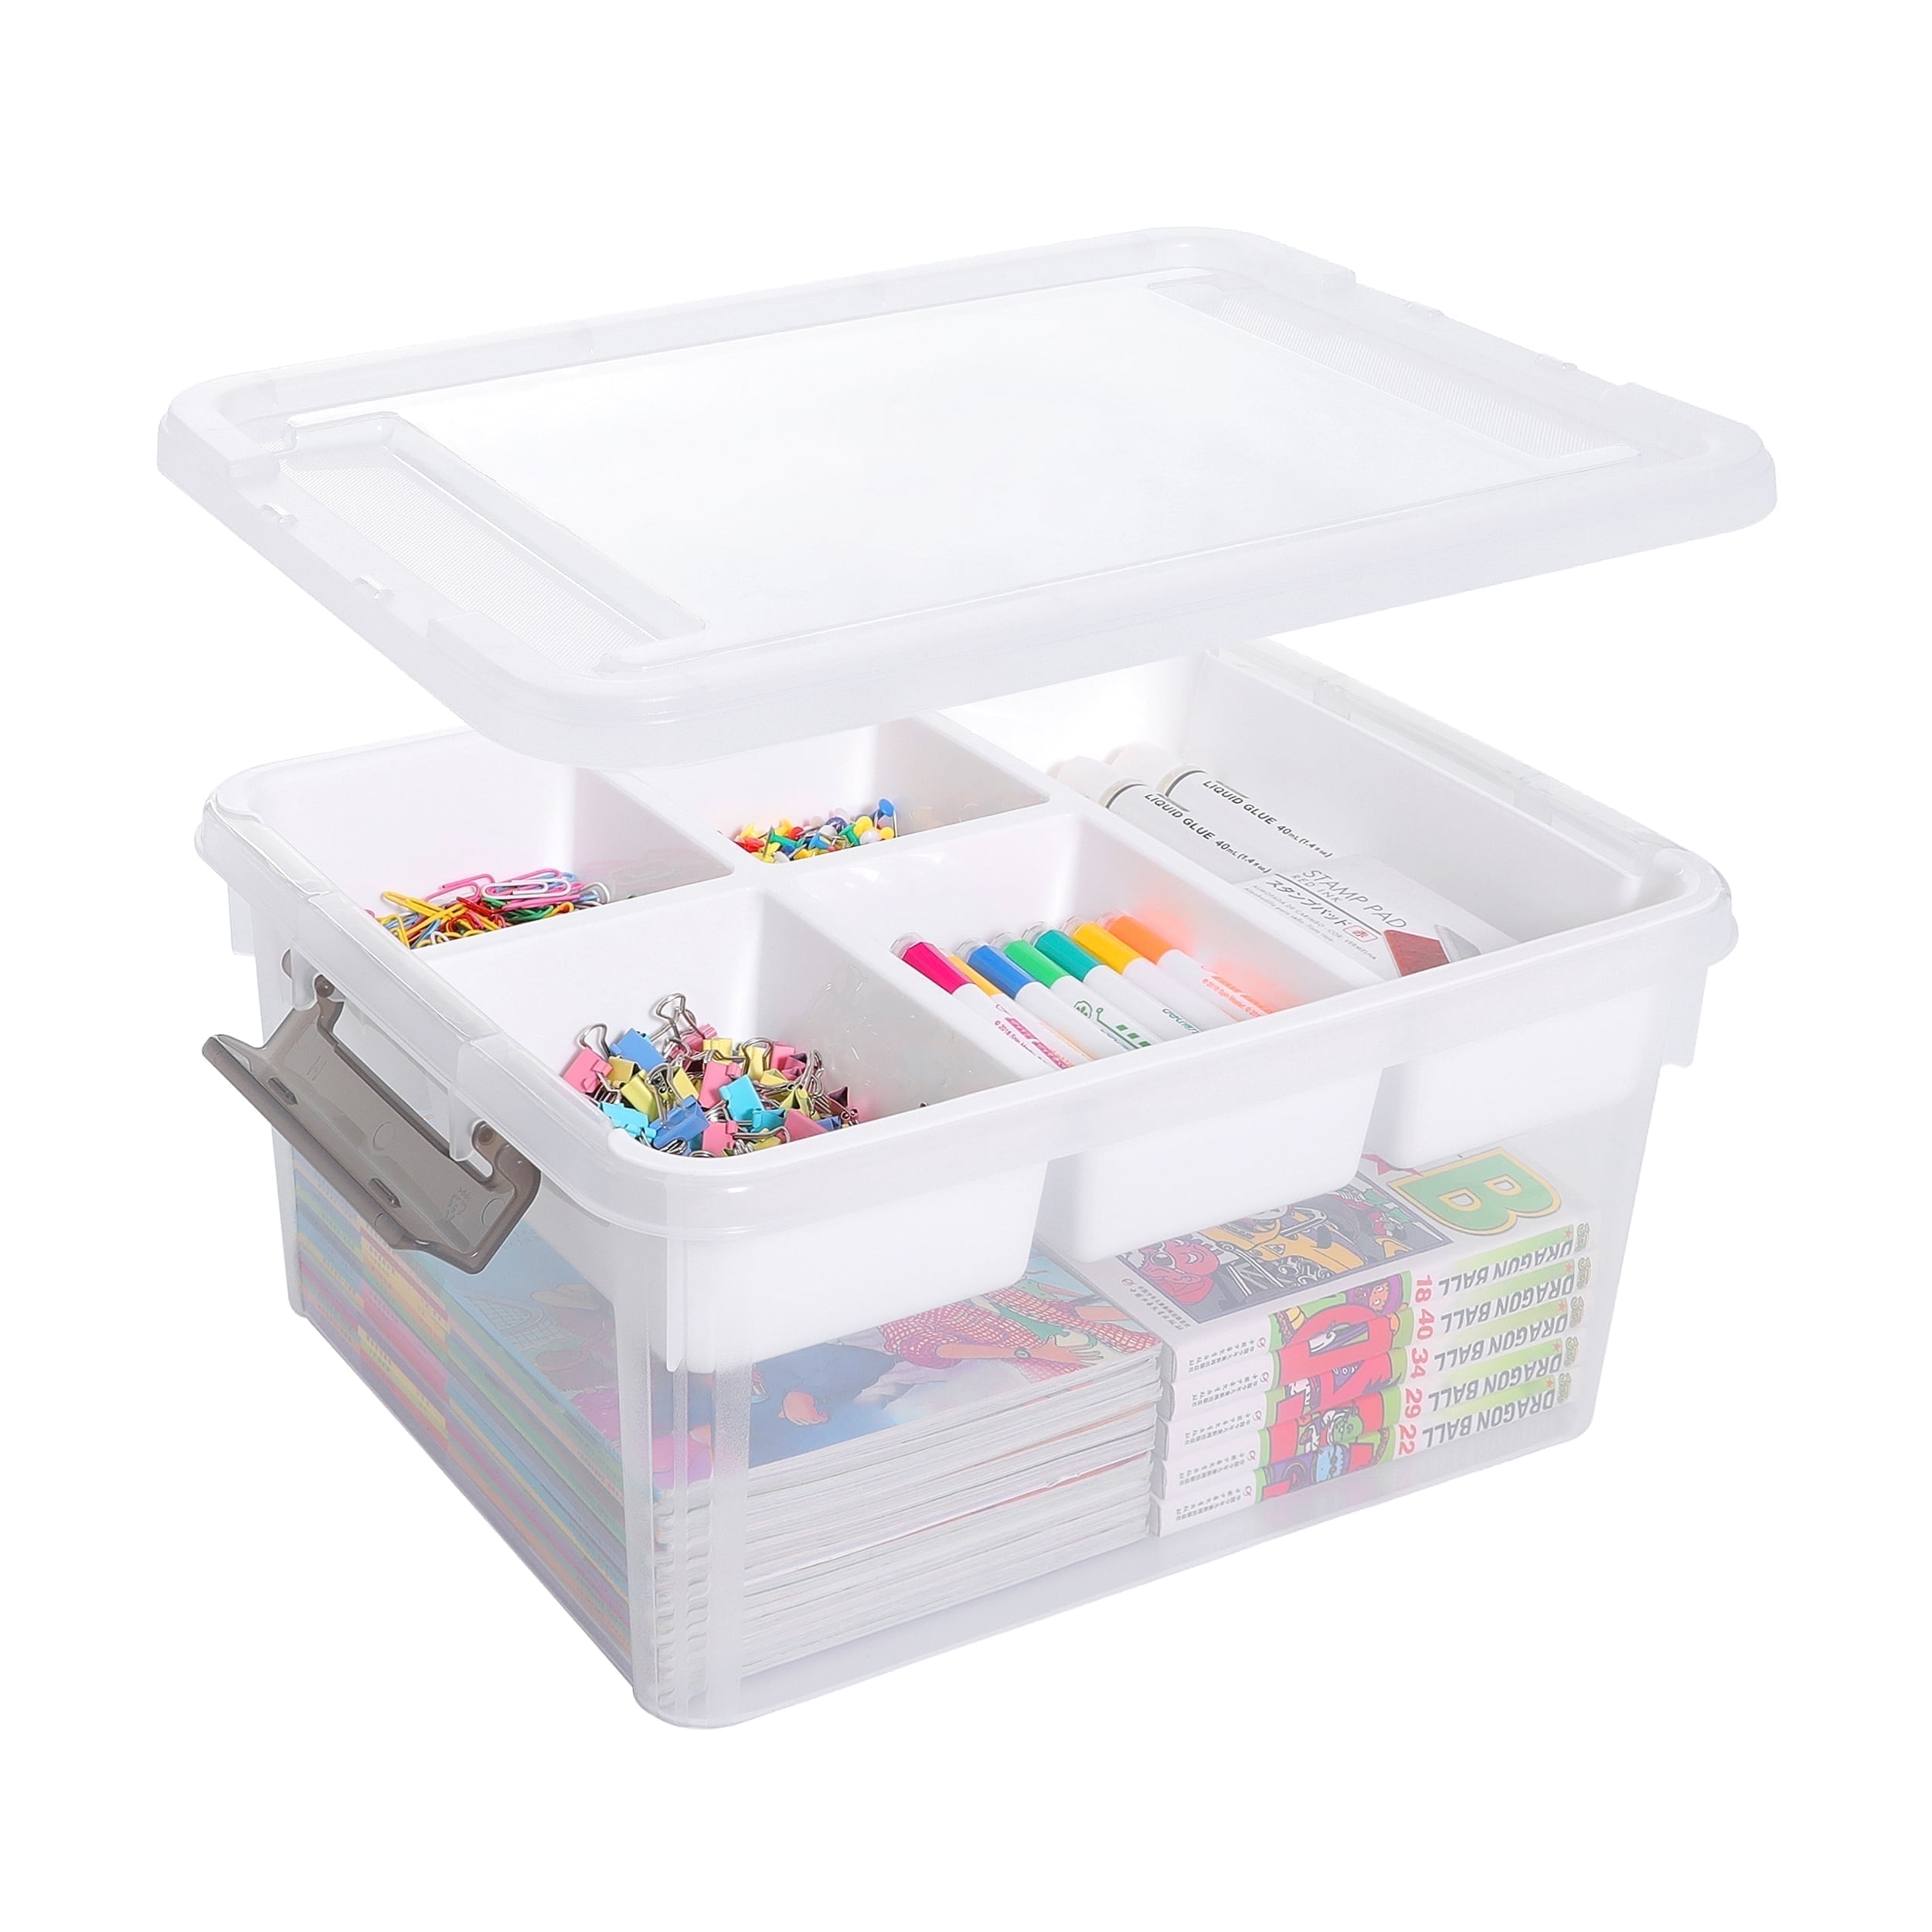 4 Pcs 15 Grid Storage Box Small Plastic Containers Compartment